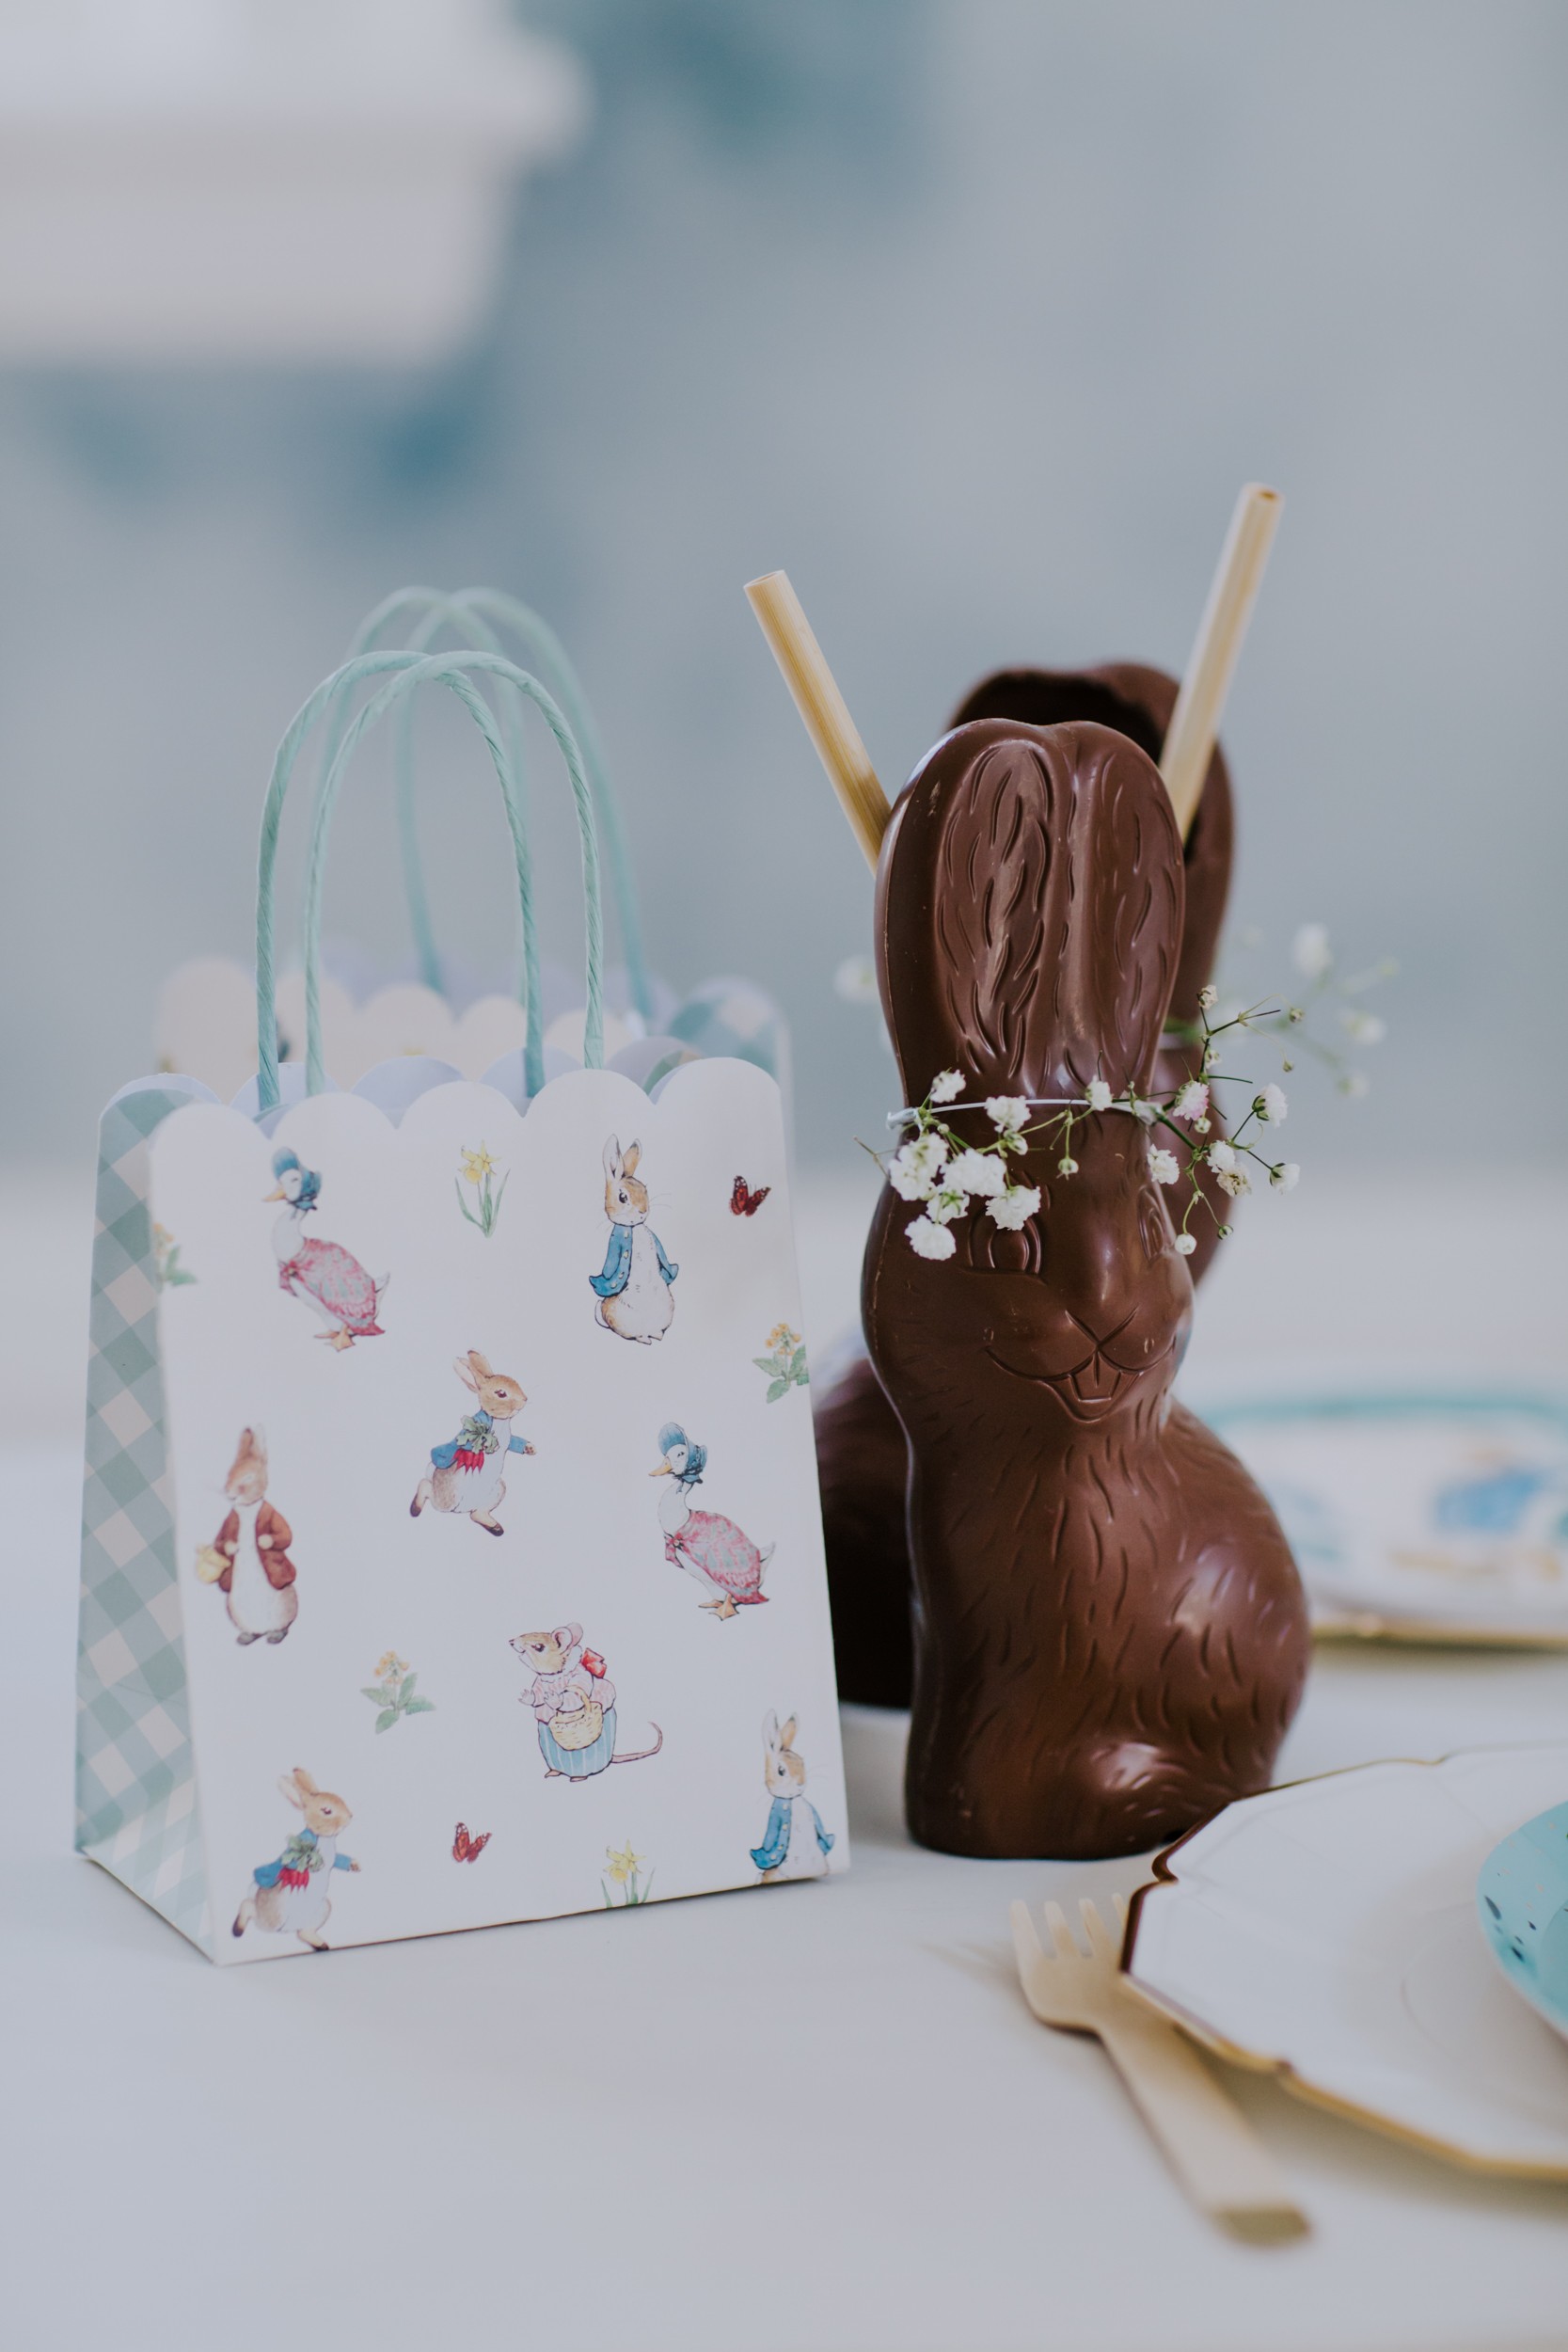 chocolate bunny is used as a glass and sits on a table holding milk